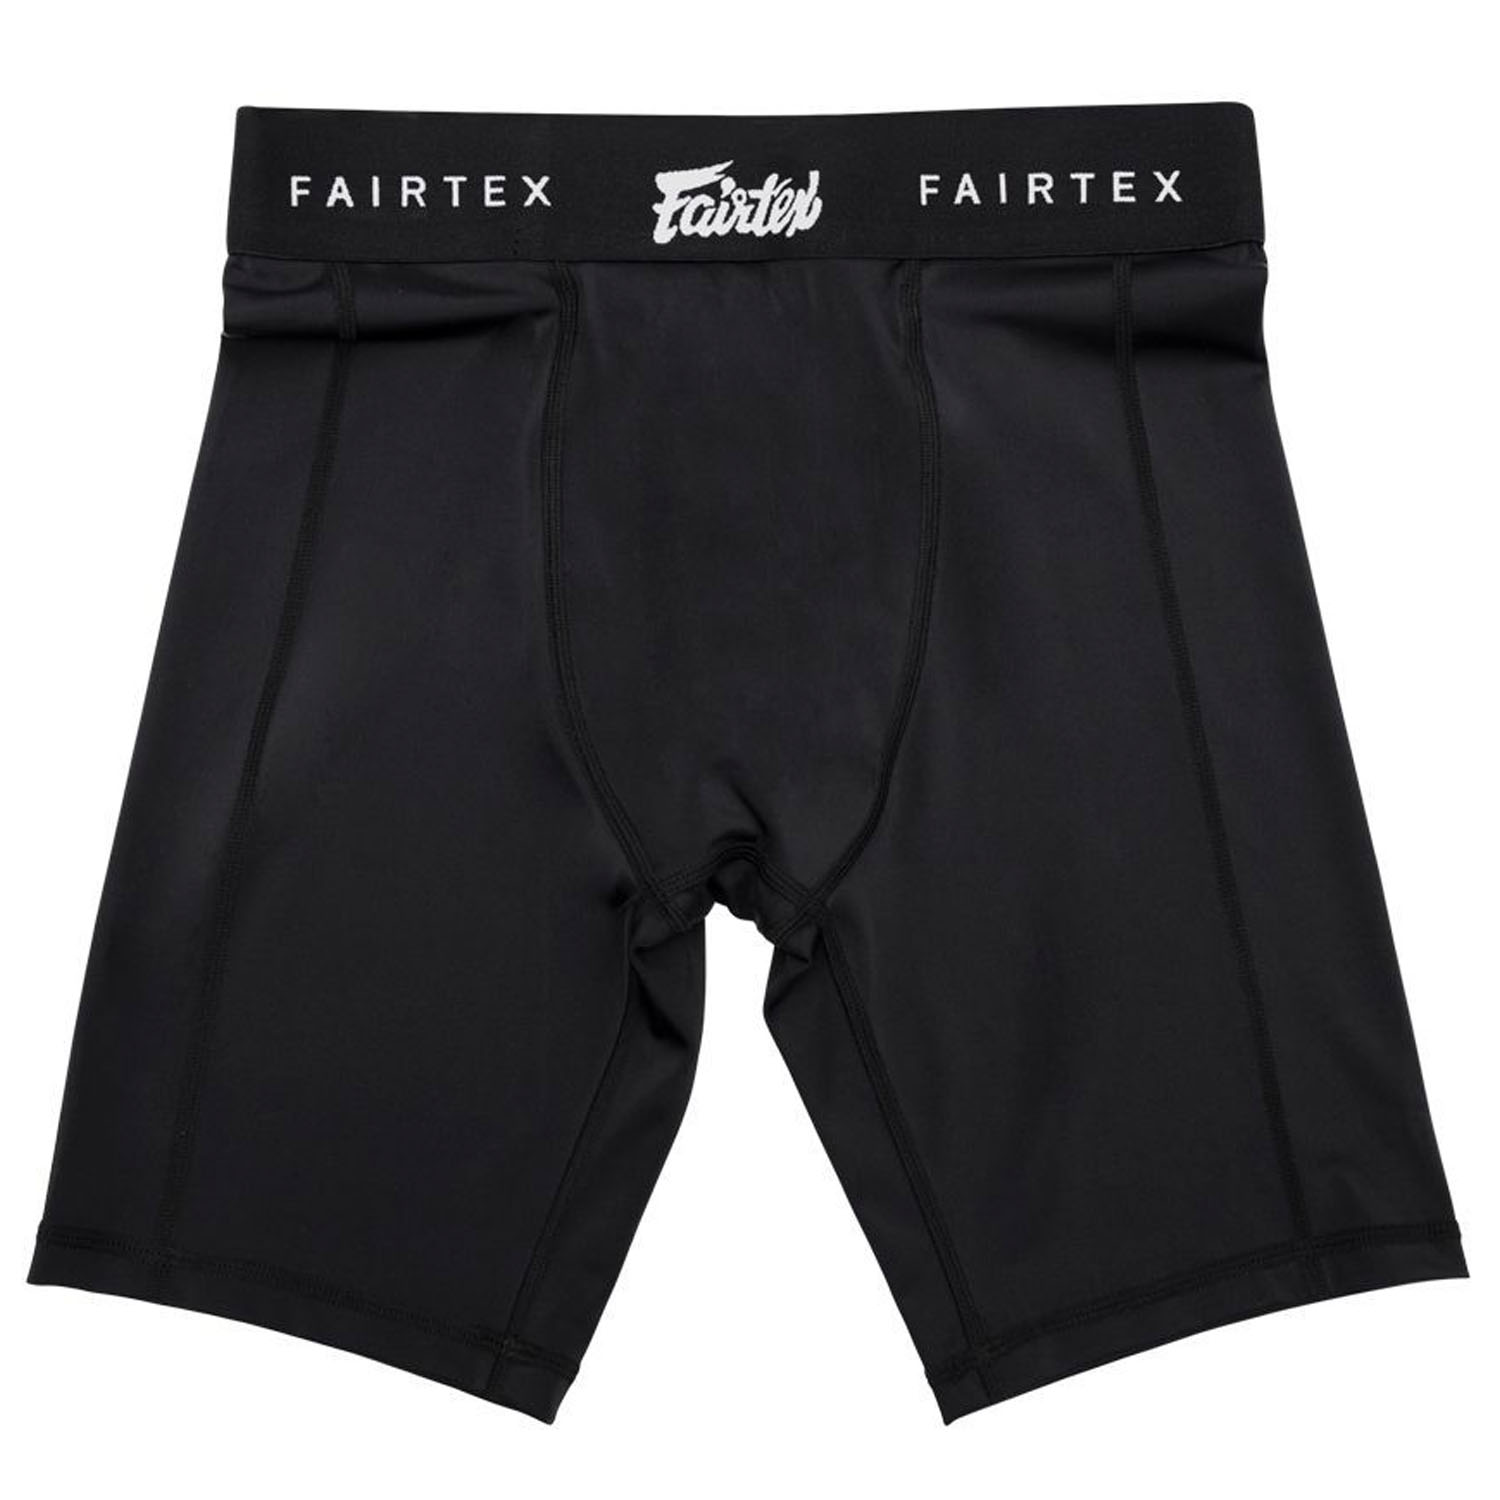 Fairtex Compression Shorts, with Athletic Cup, GC3, black, XL